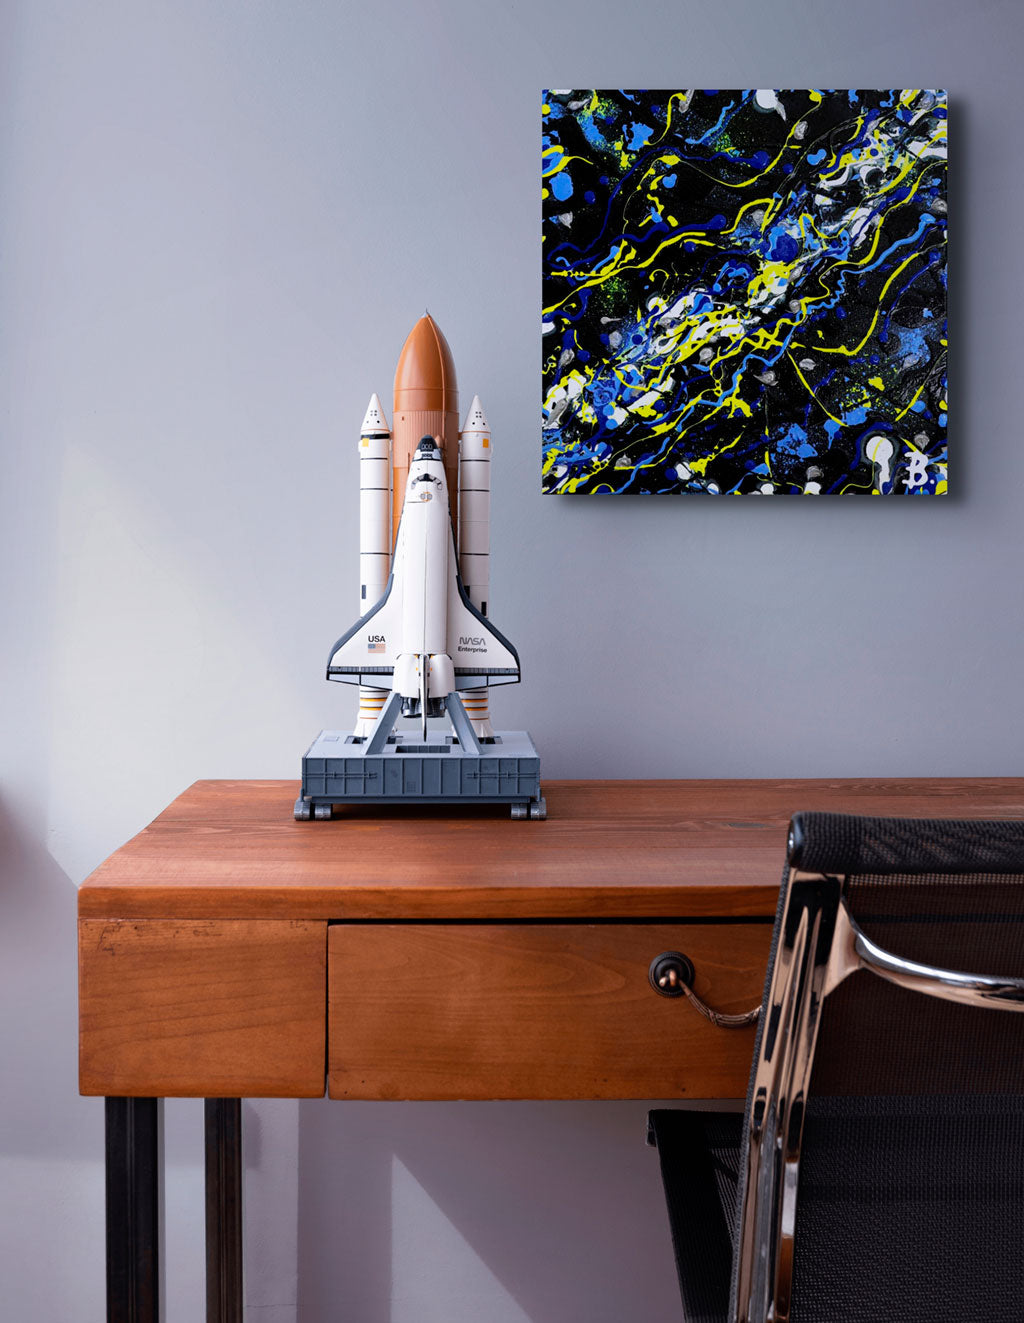 Cosmic, original abstract art by Brigdet Bradley. Brightly coloured and textured, commissioned artwork seen hanging above a desk by rocket model